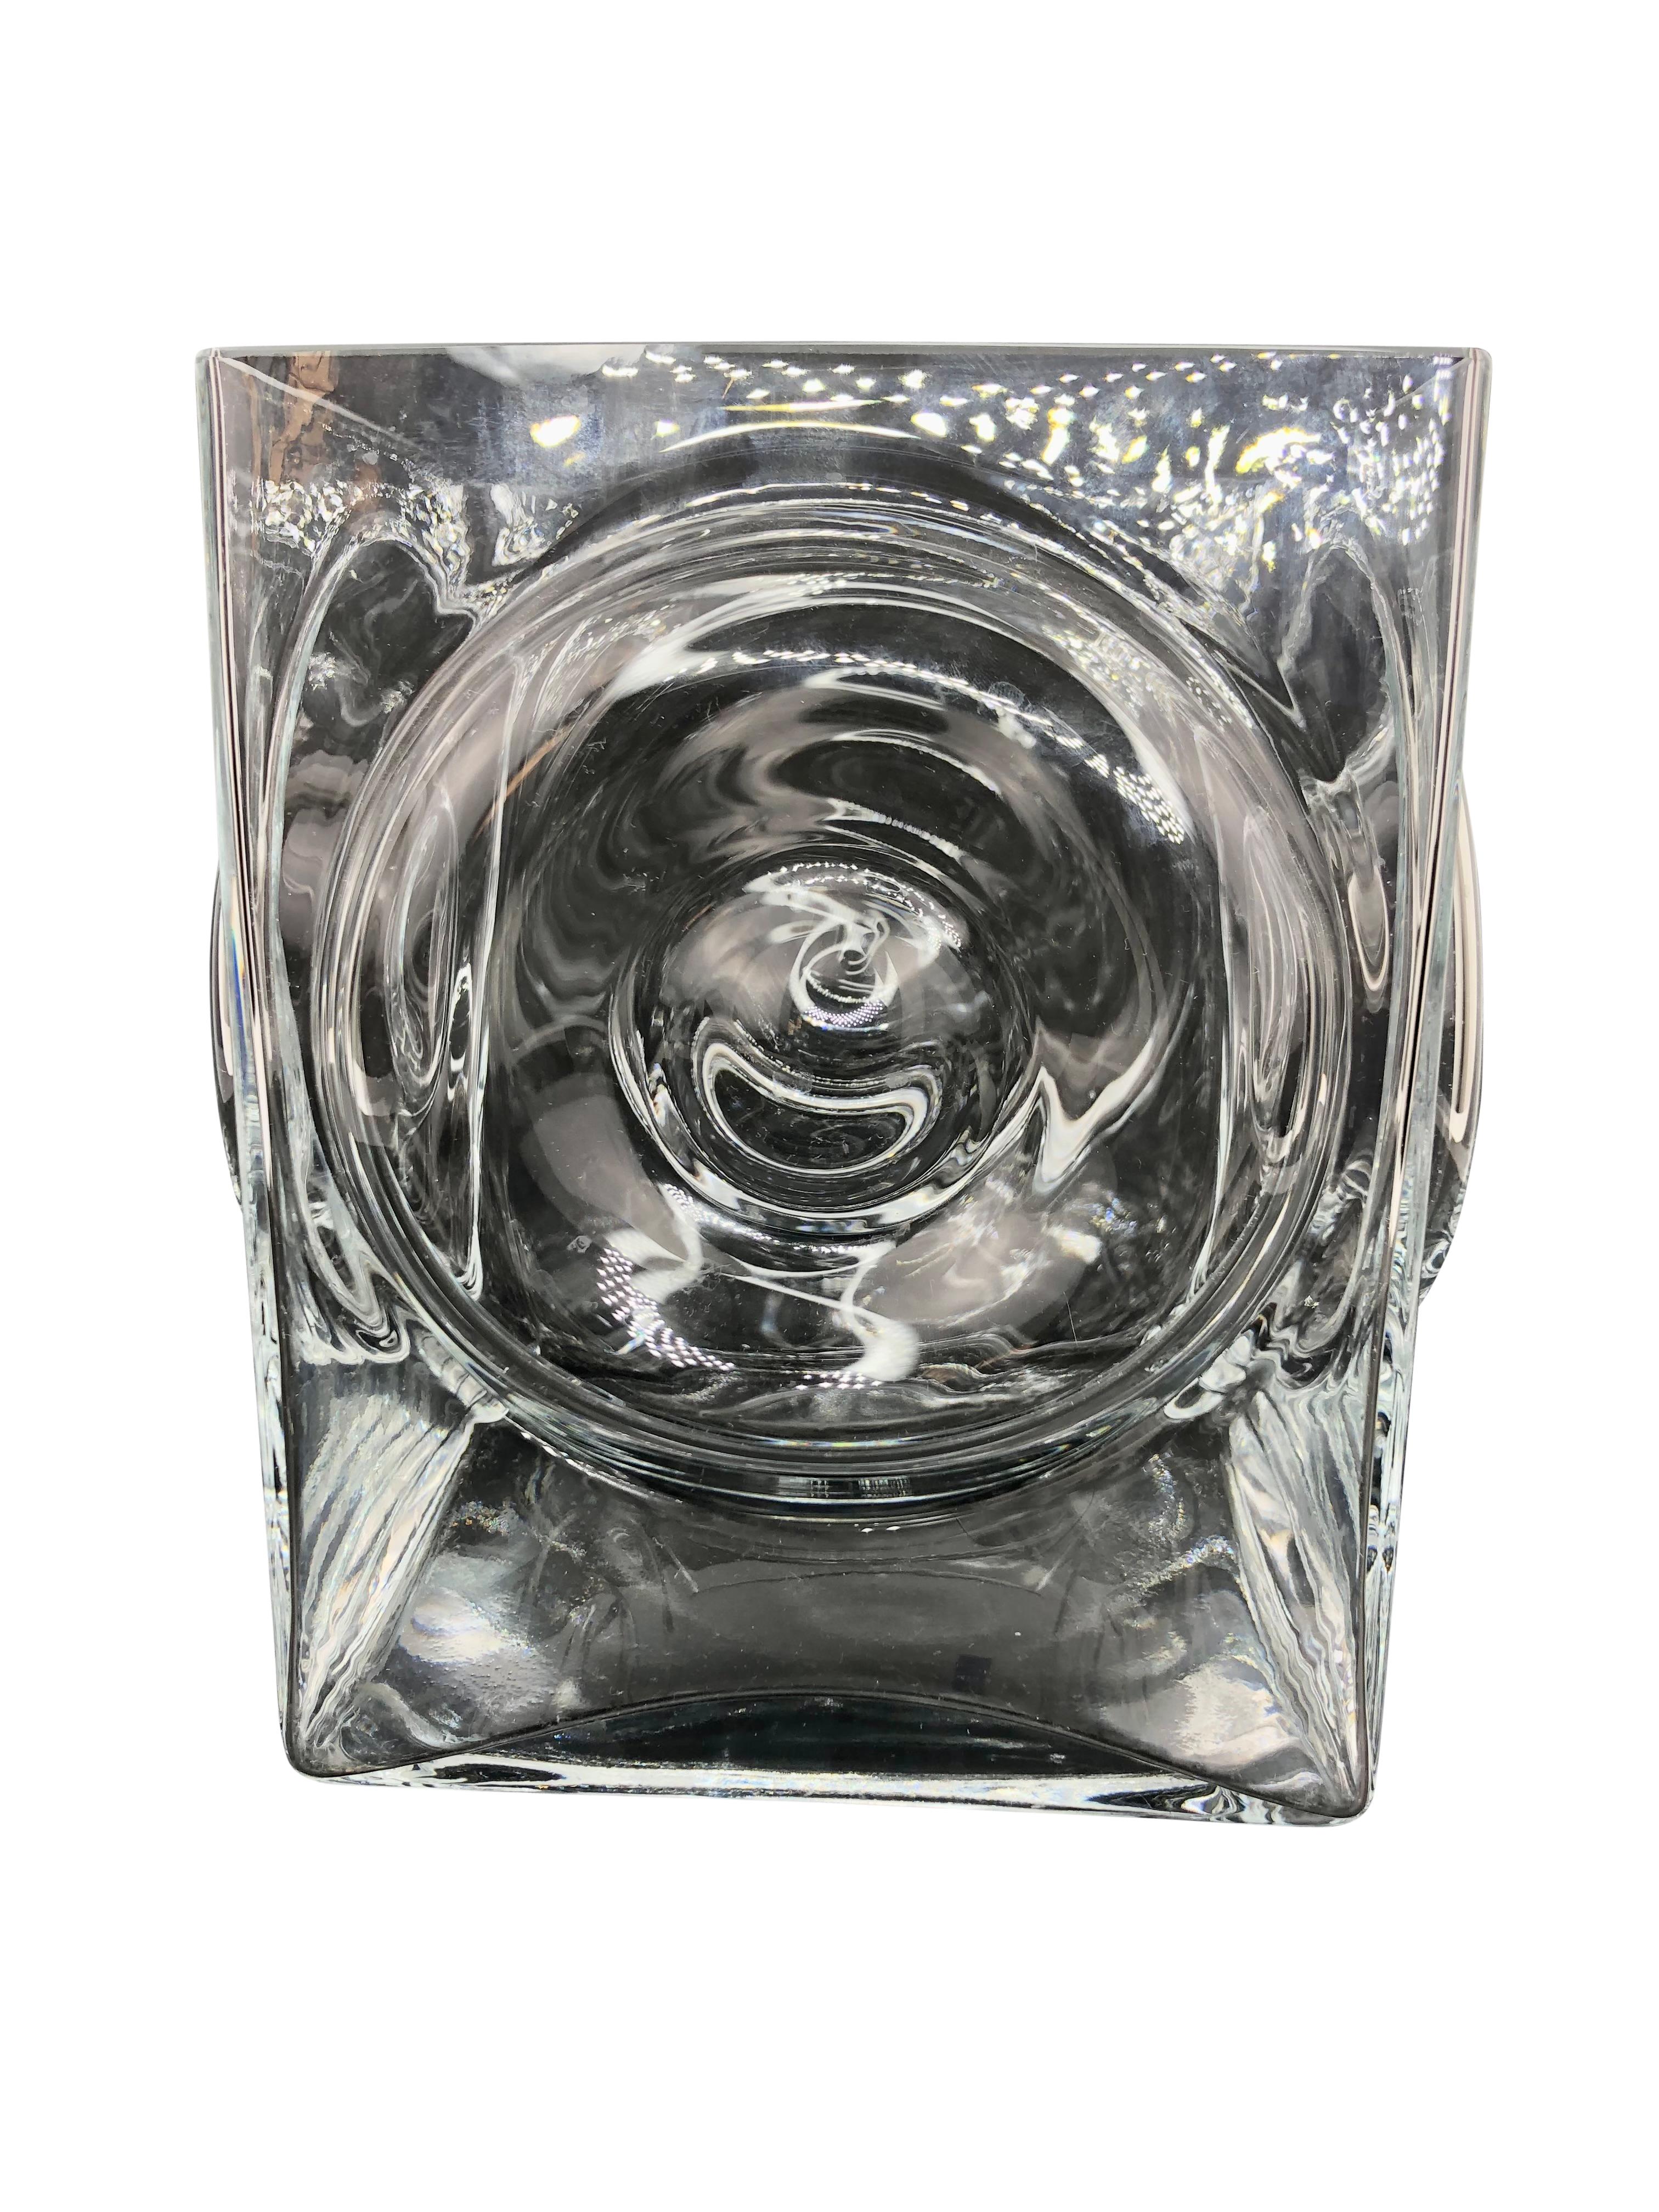 Mid-Century Square Glass Ice Bucket with Bull-Eye Design on each side. Measures 7 1/8